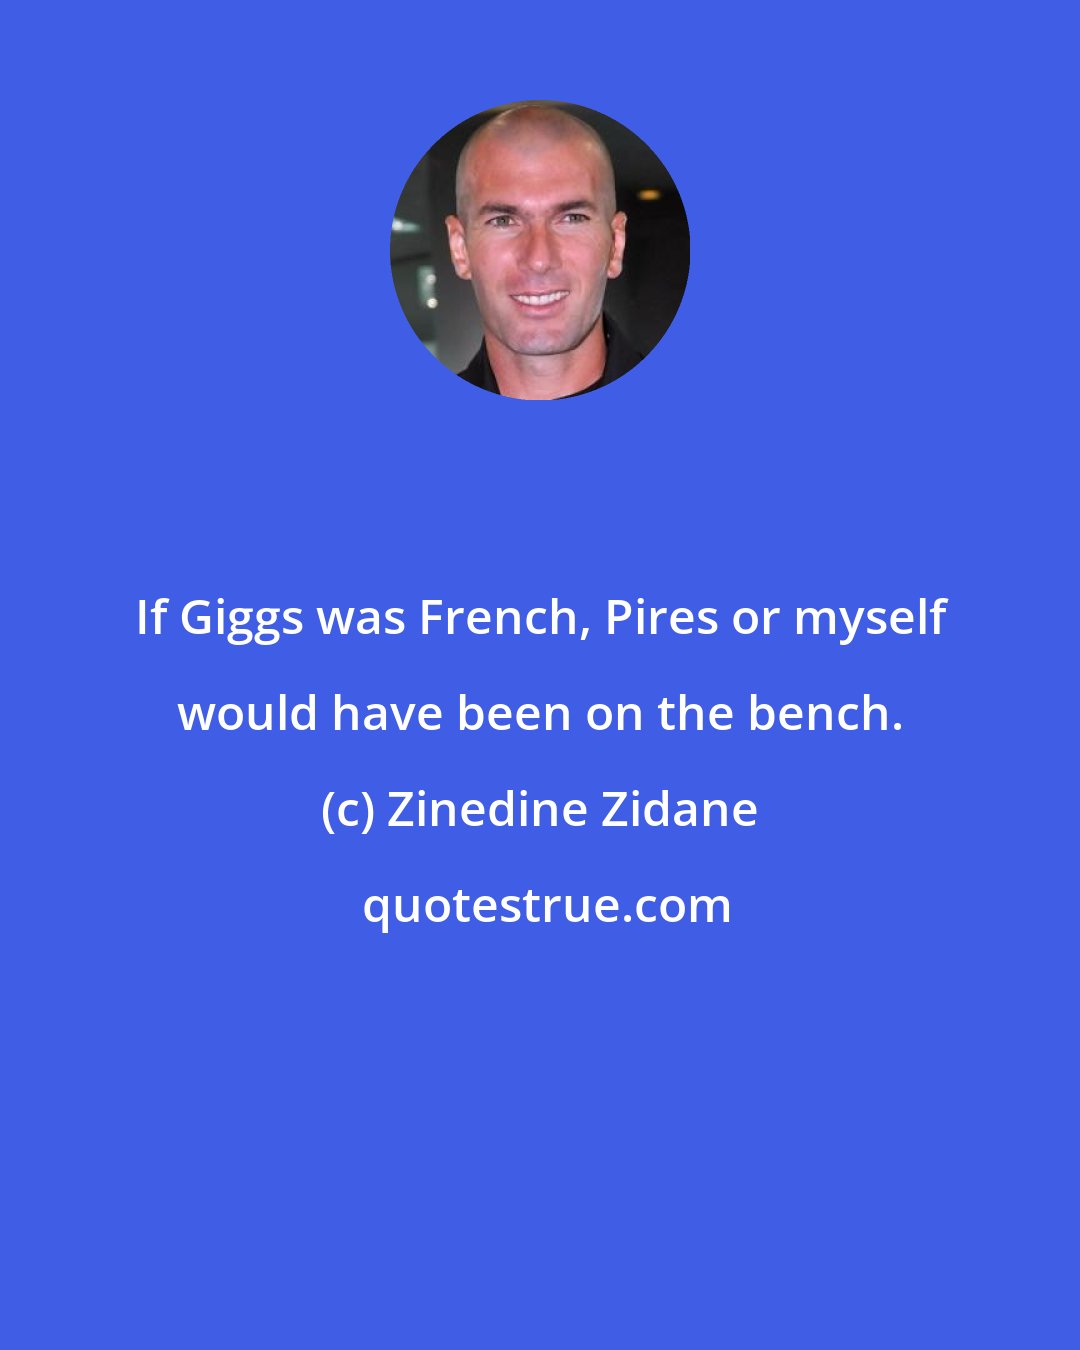 Zinedine Zidane: If Giggs was French, Pires or myself would have been on the bench.